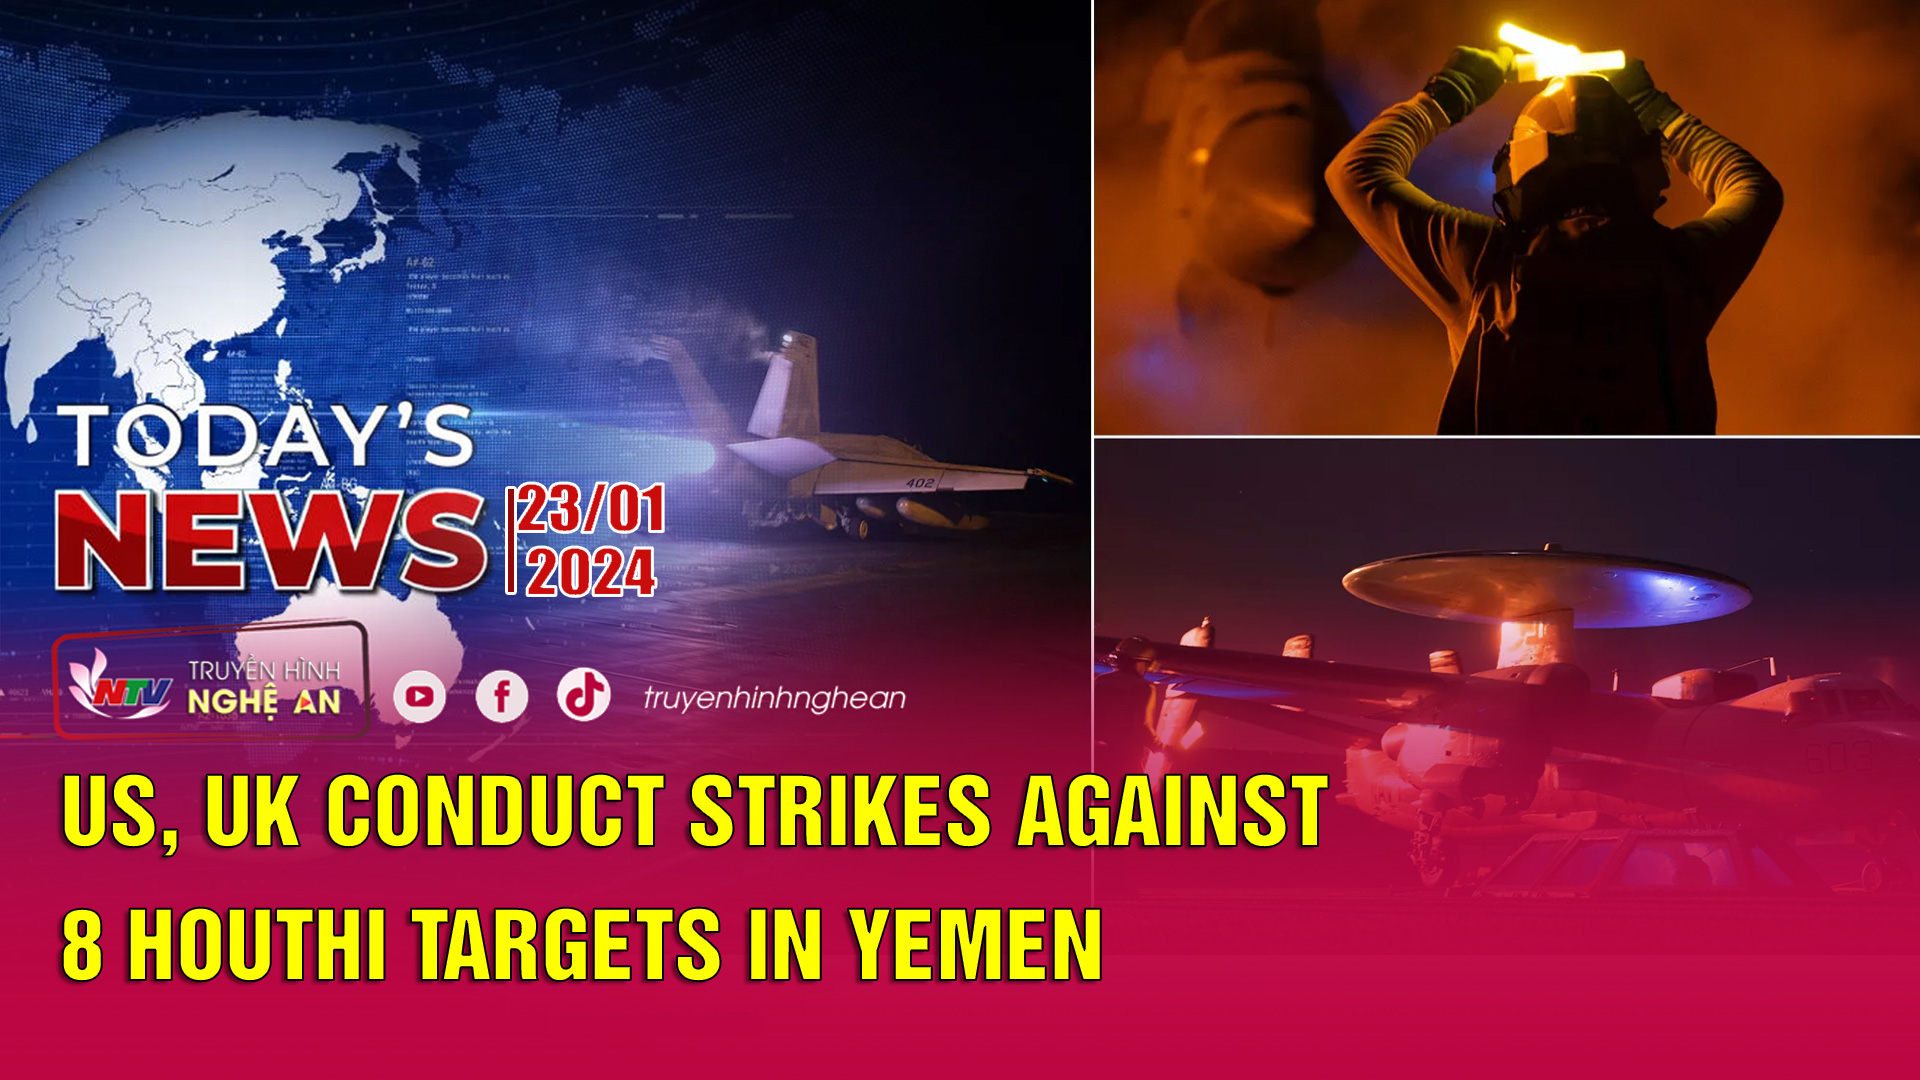 Today's News - 23/01/2024: US, UK conduct strikes against 8 Houthi targets in Yemen